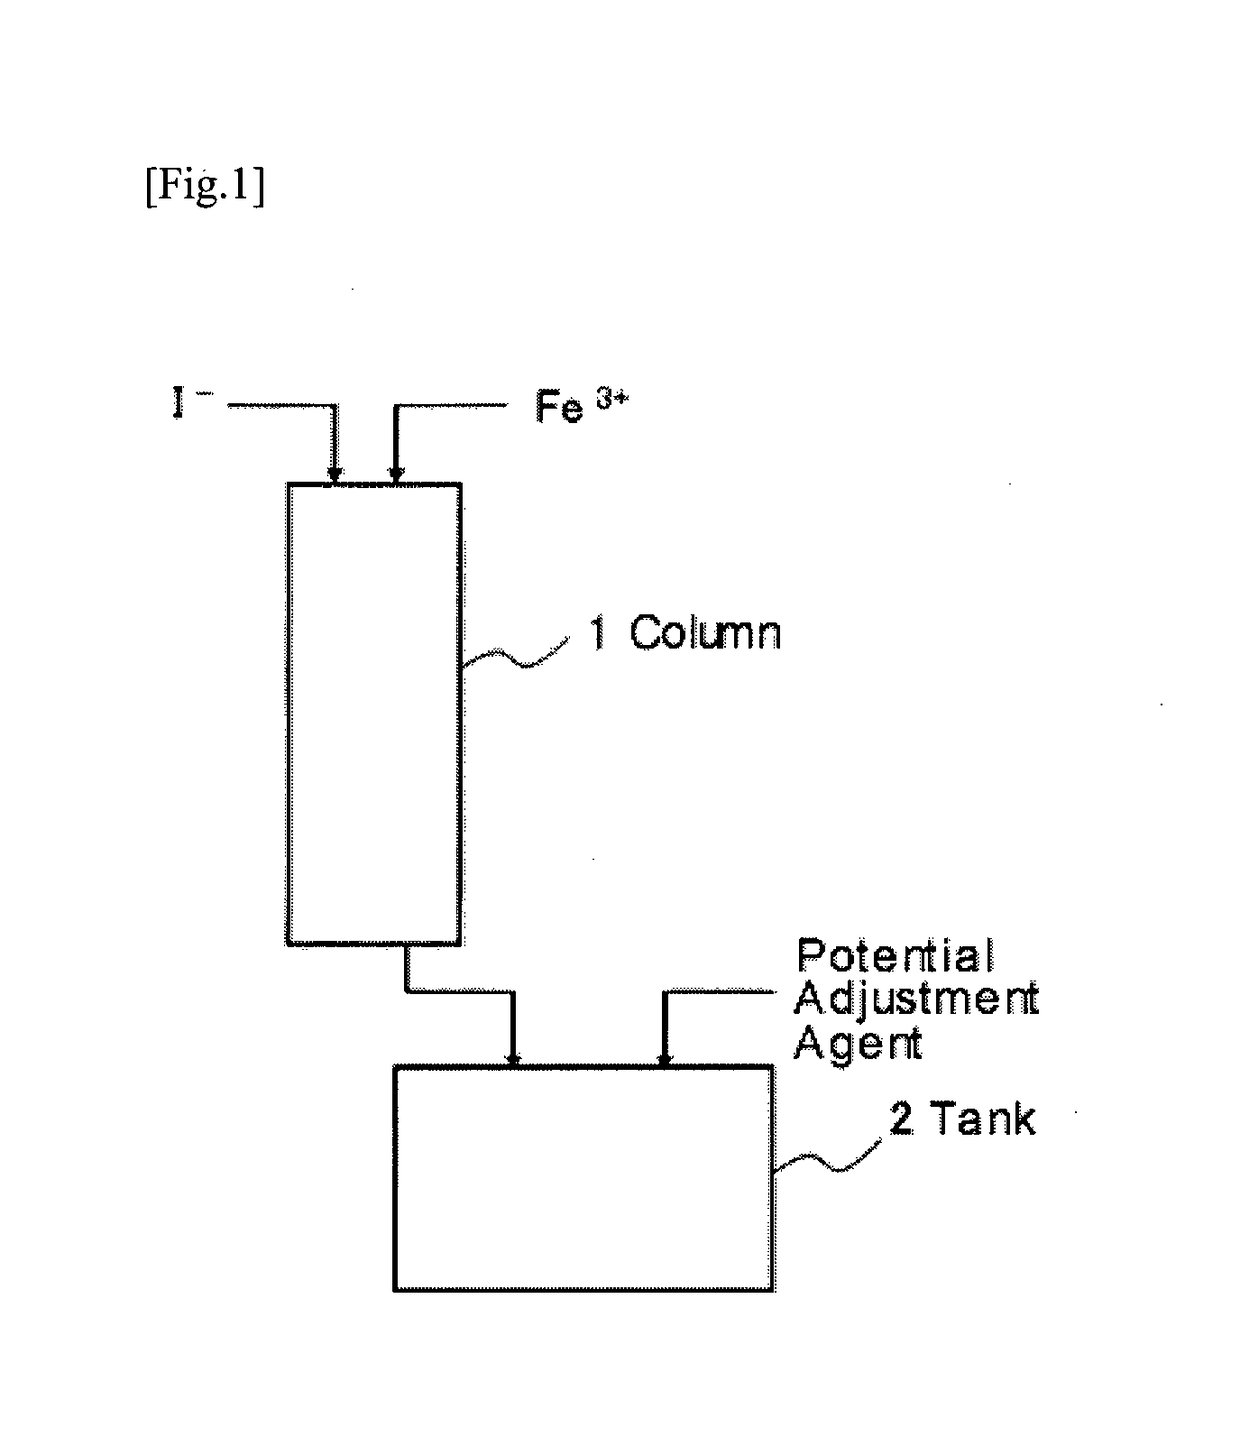 Method of leaching copper from copper sulfide ore and method of evaluating iodine loss content of column leaching test of the copper sulfide ore